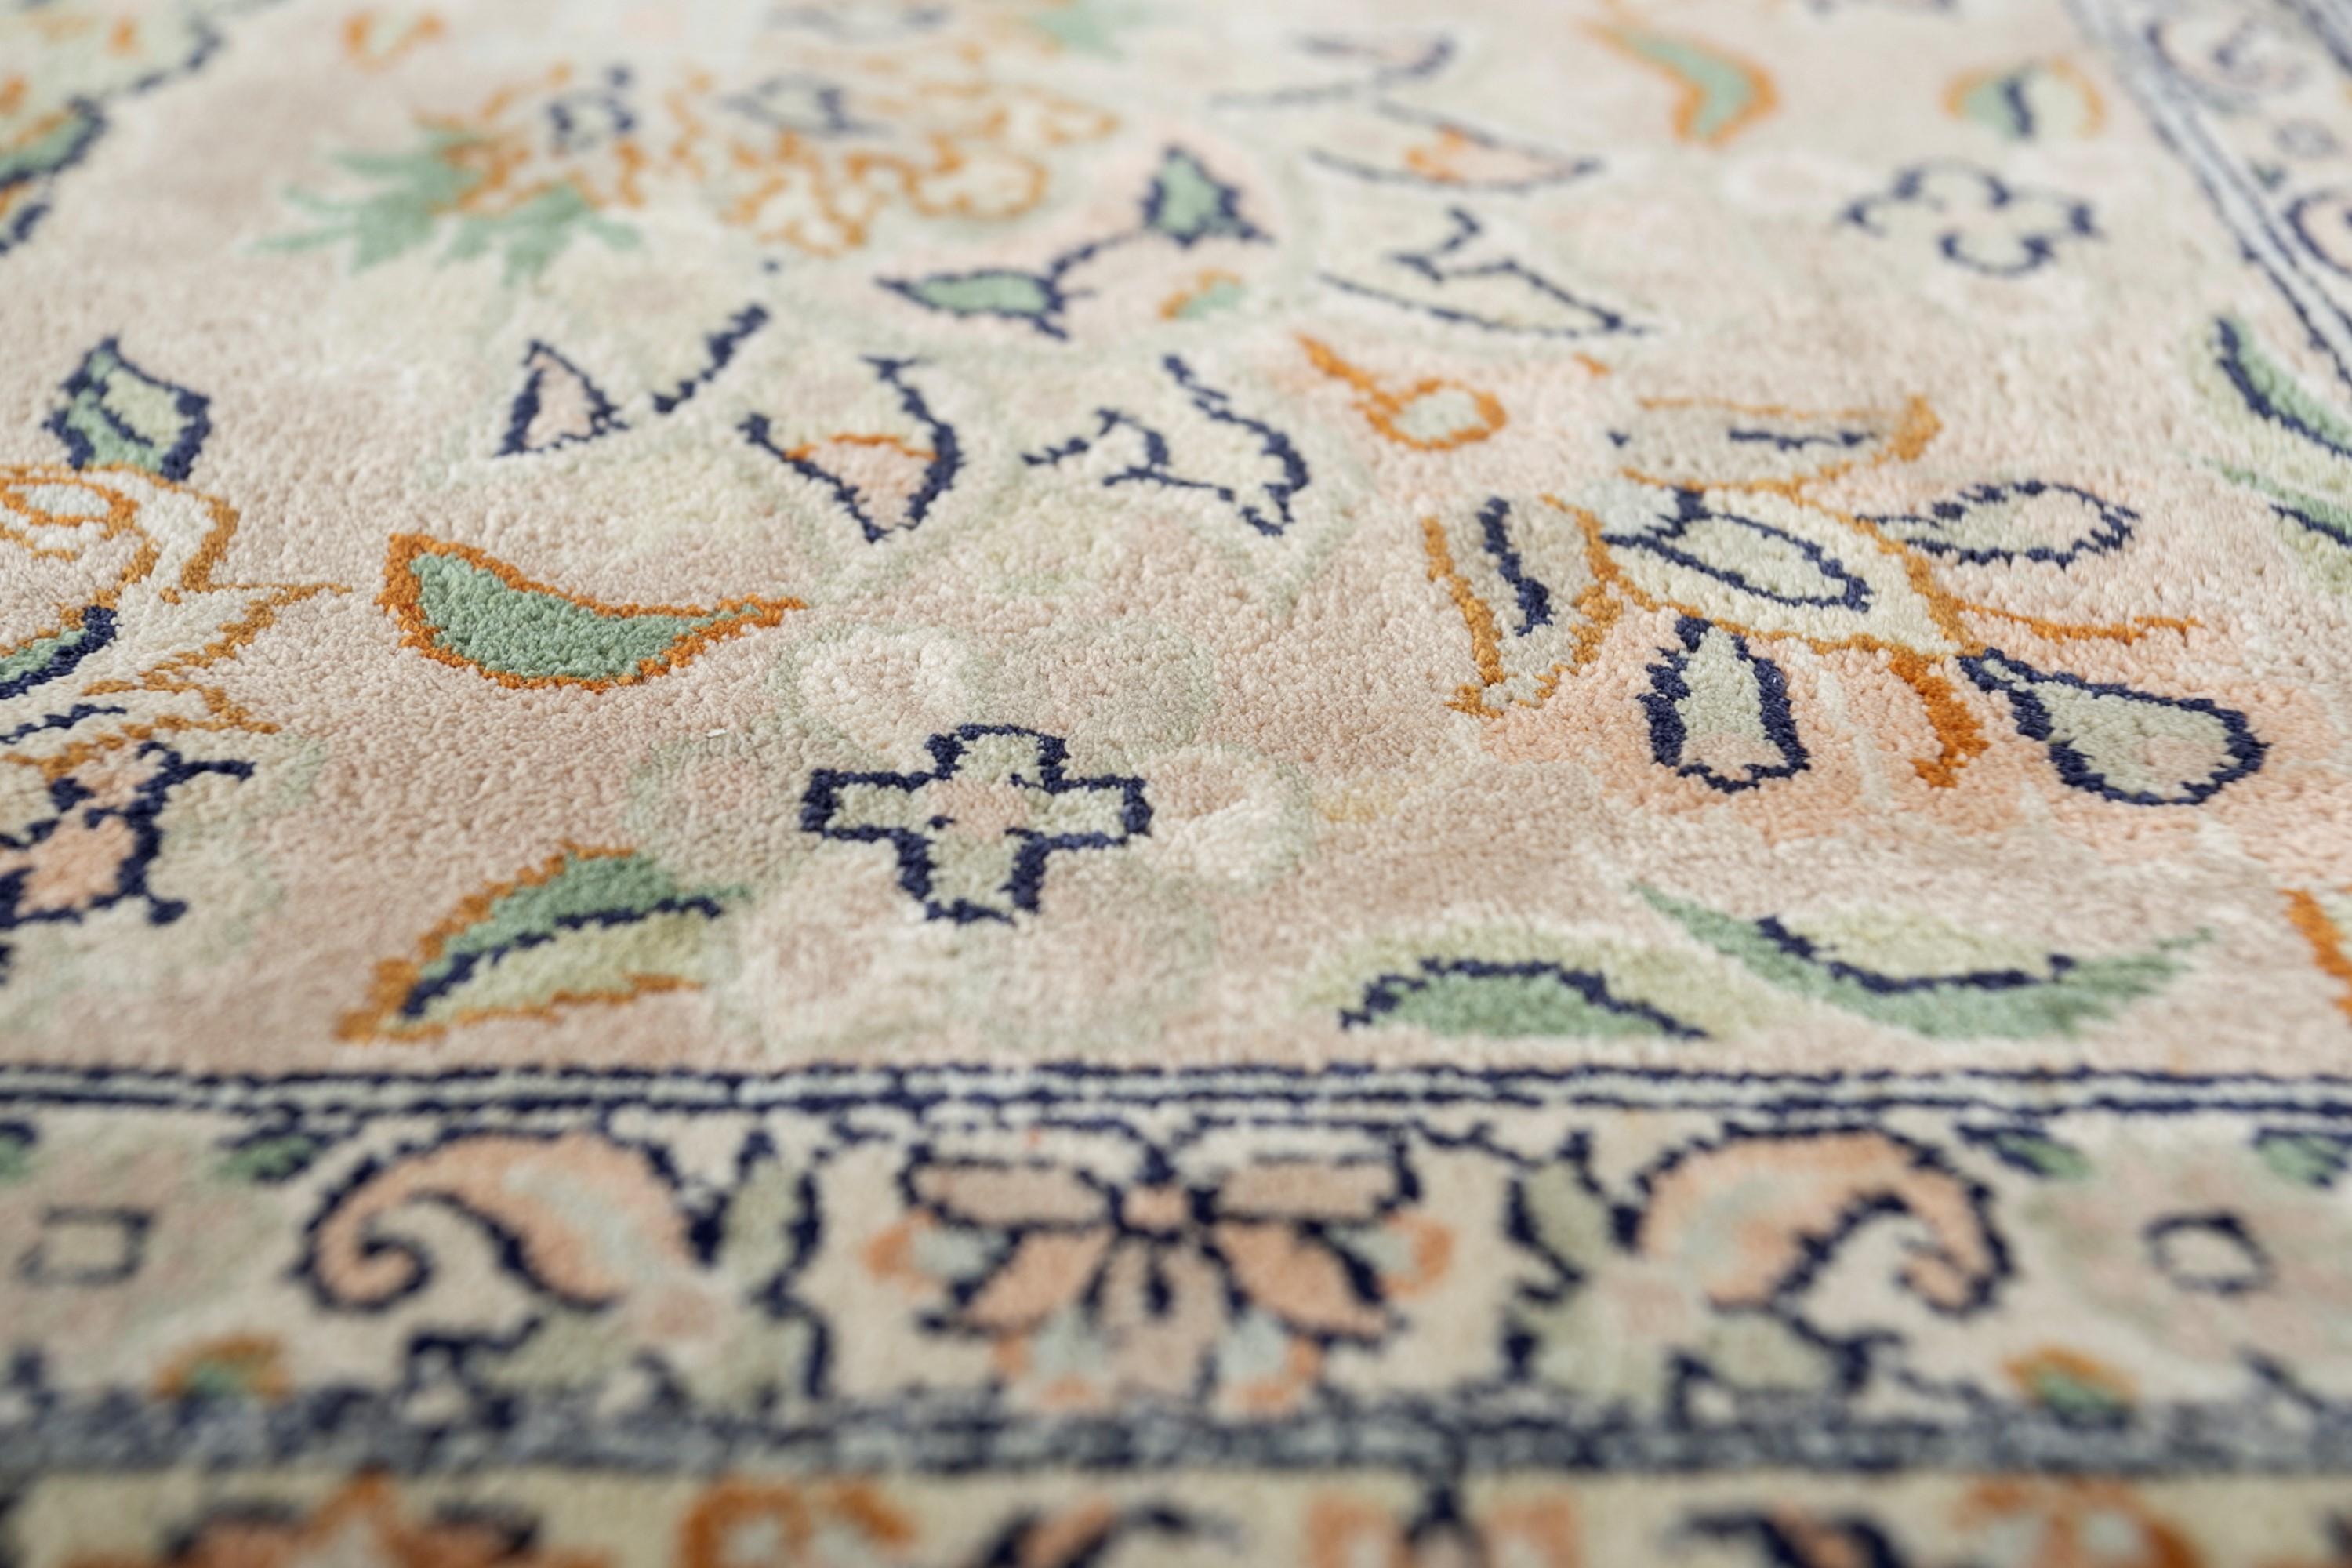 Embark on an unforgettable journey to the breathtaking valleys of Kashmir with this exquisite, hand-knotted rug. Crafted by skilled artisans using pure silk, this traditional masterpiece captures the unmatchable beauty of the region's vibrant